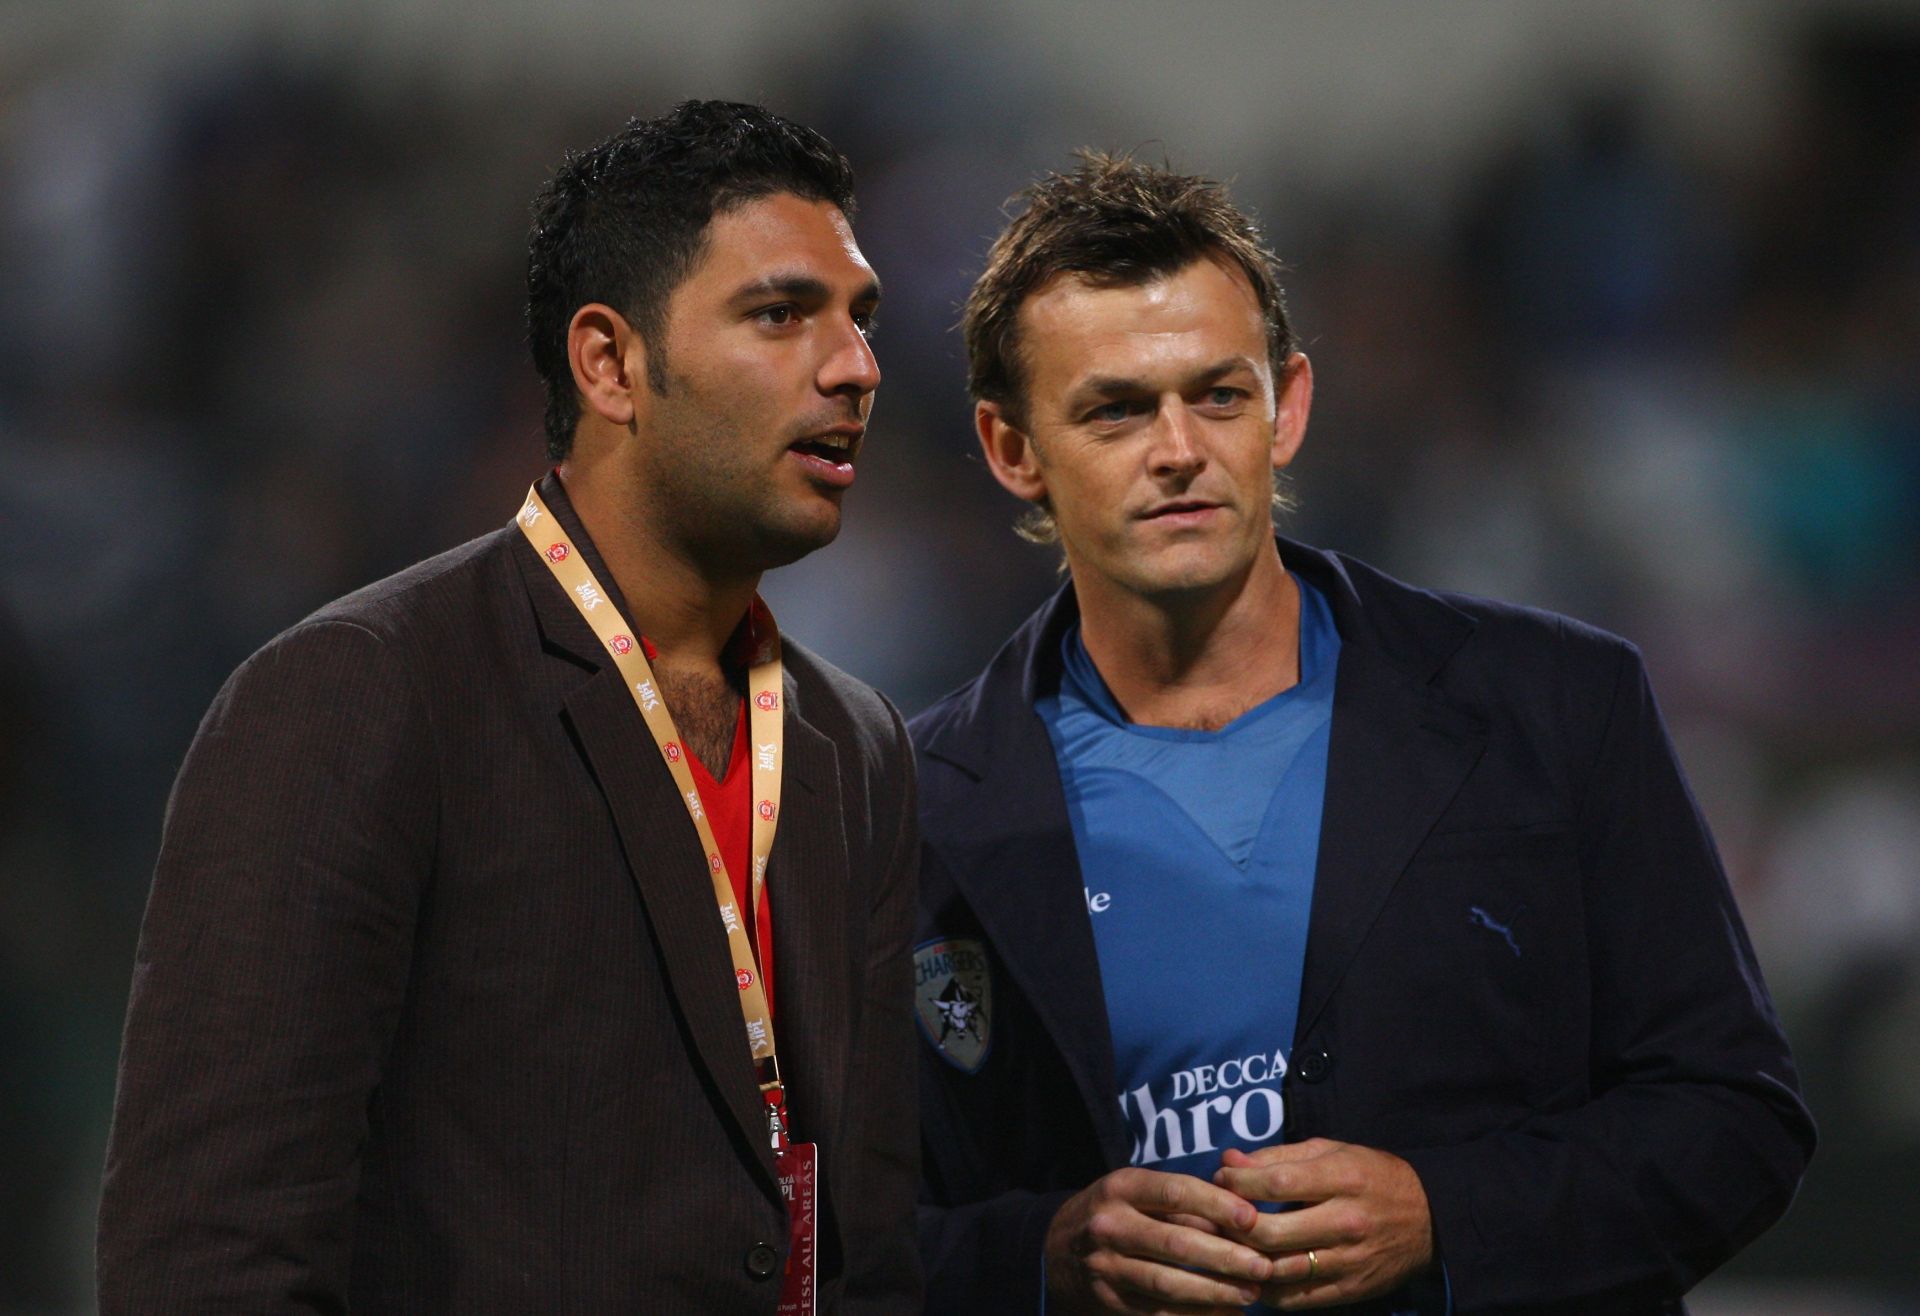 Yuvraj Singh with Adam Gilchrist during an IPL event in 2009